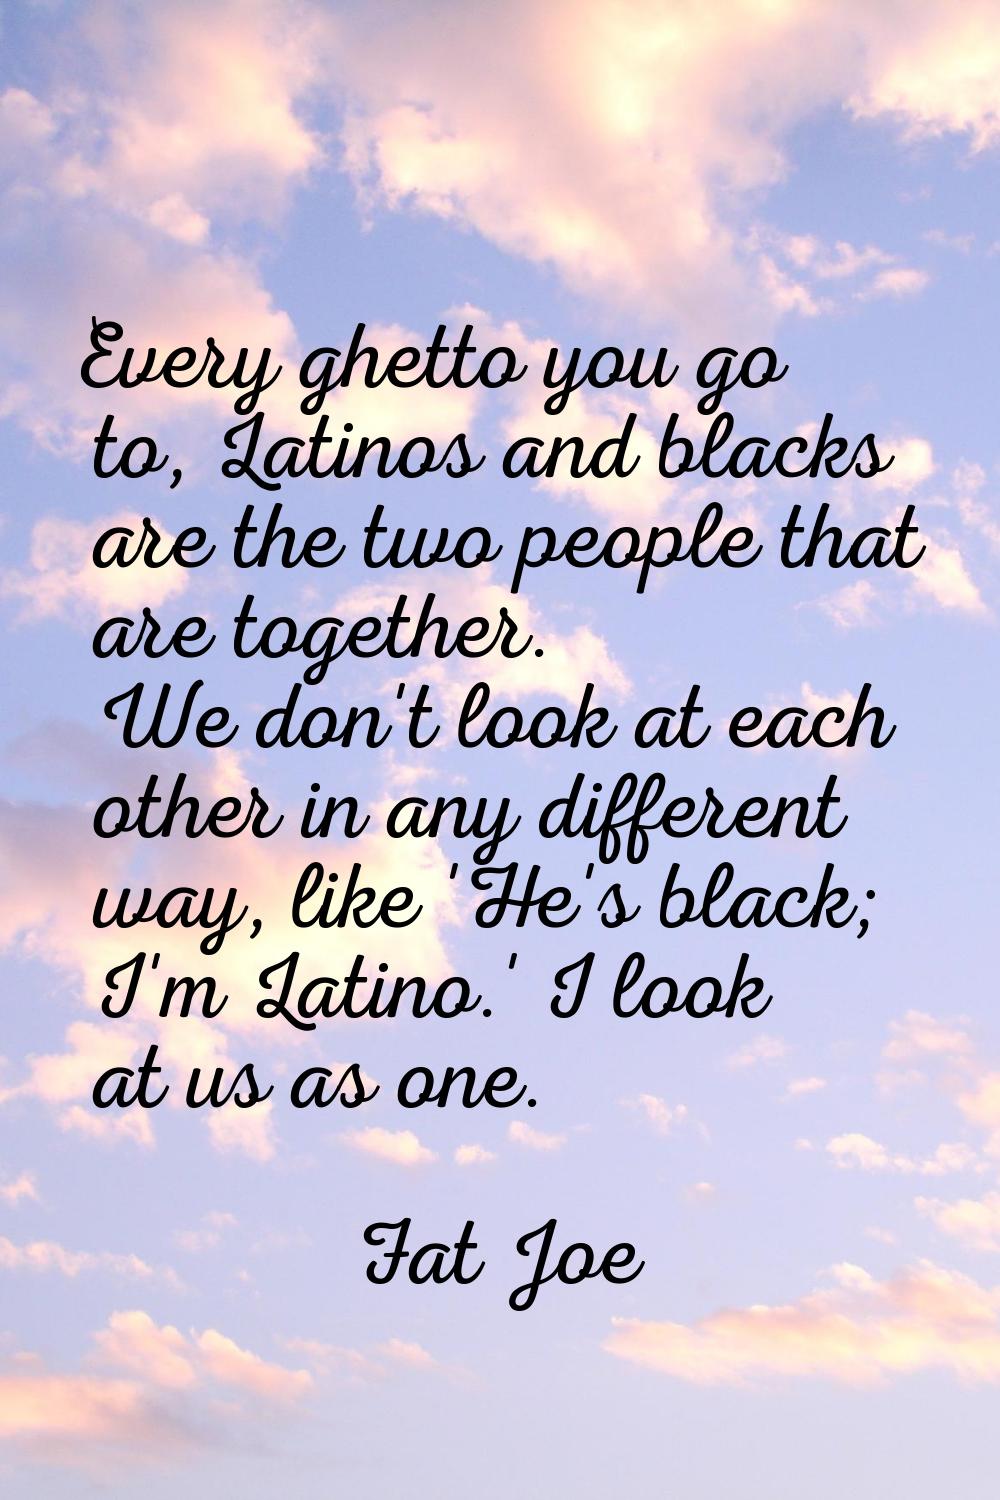 Every ghetto you go to, Latinos and blacks are the two people that are together. We don't look at e